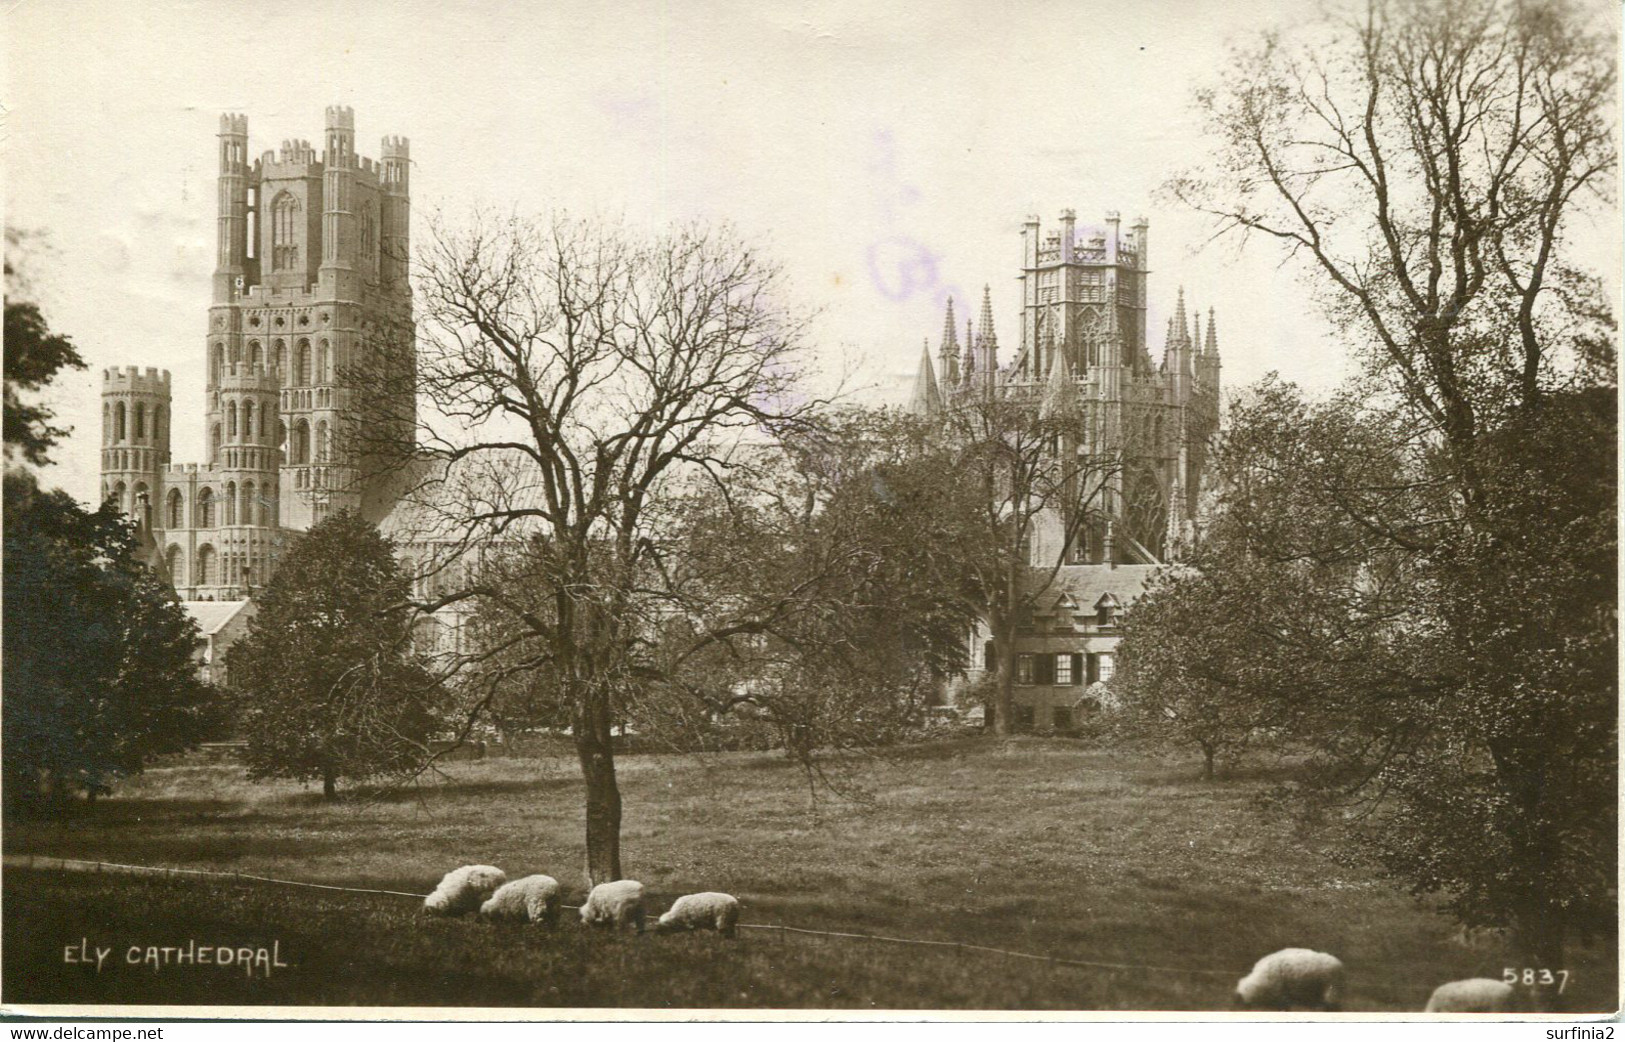 CAMBS - ELY - CATHEDRAL RP Ca375 - Ely